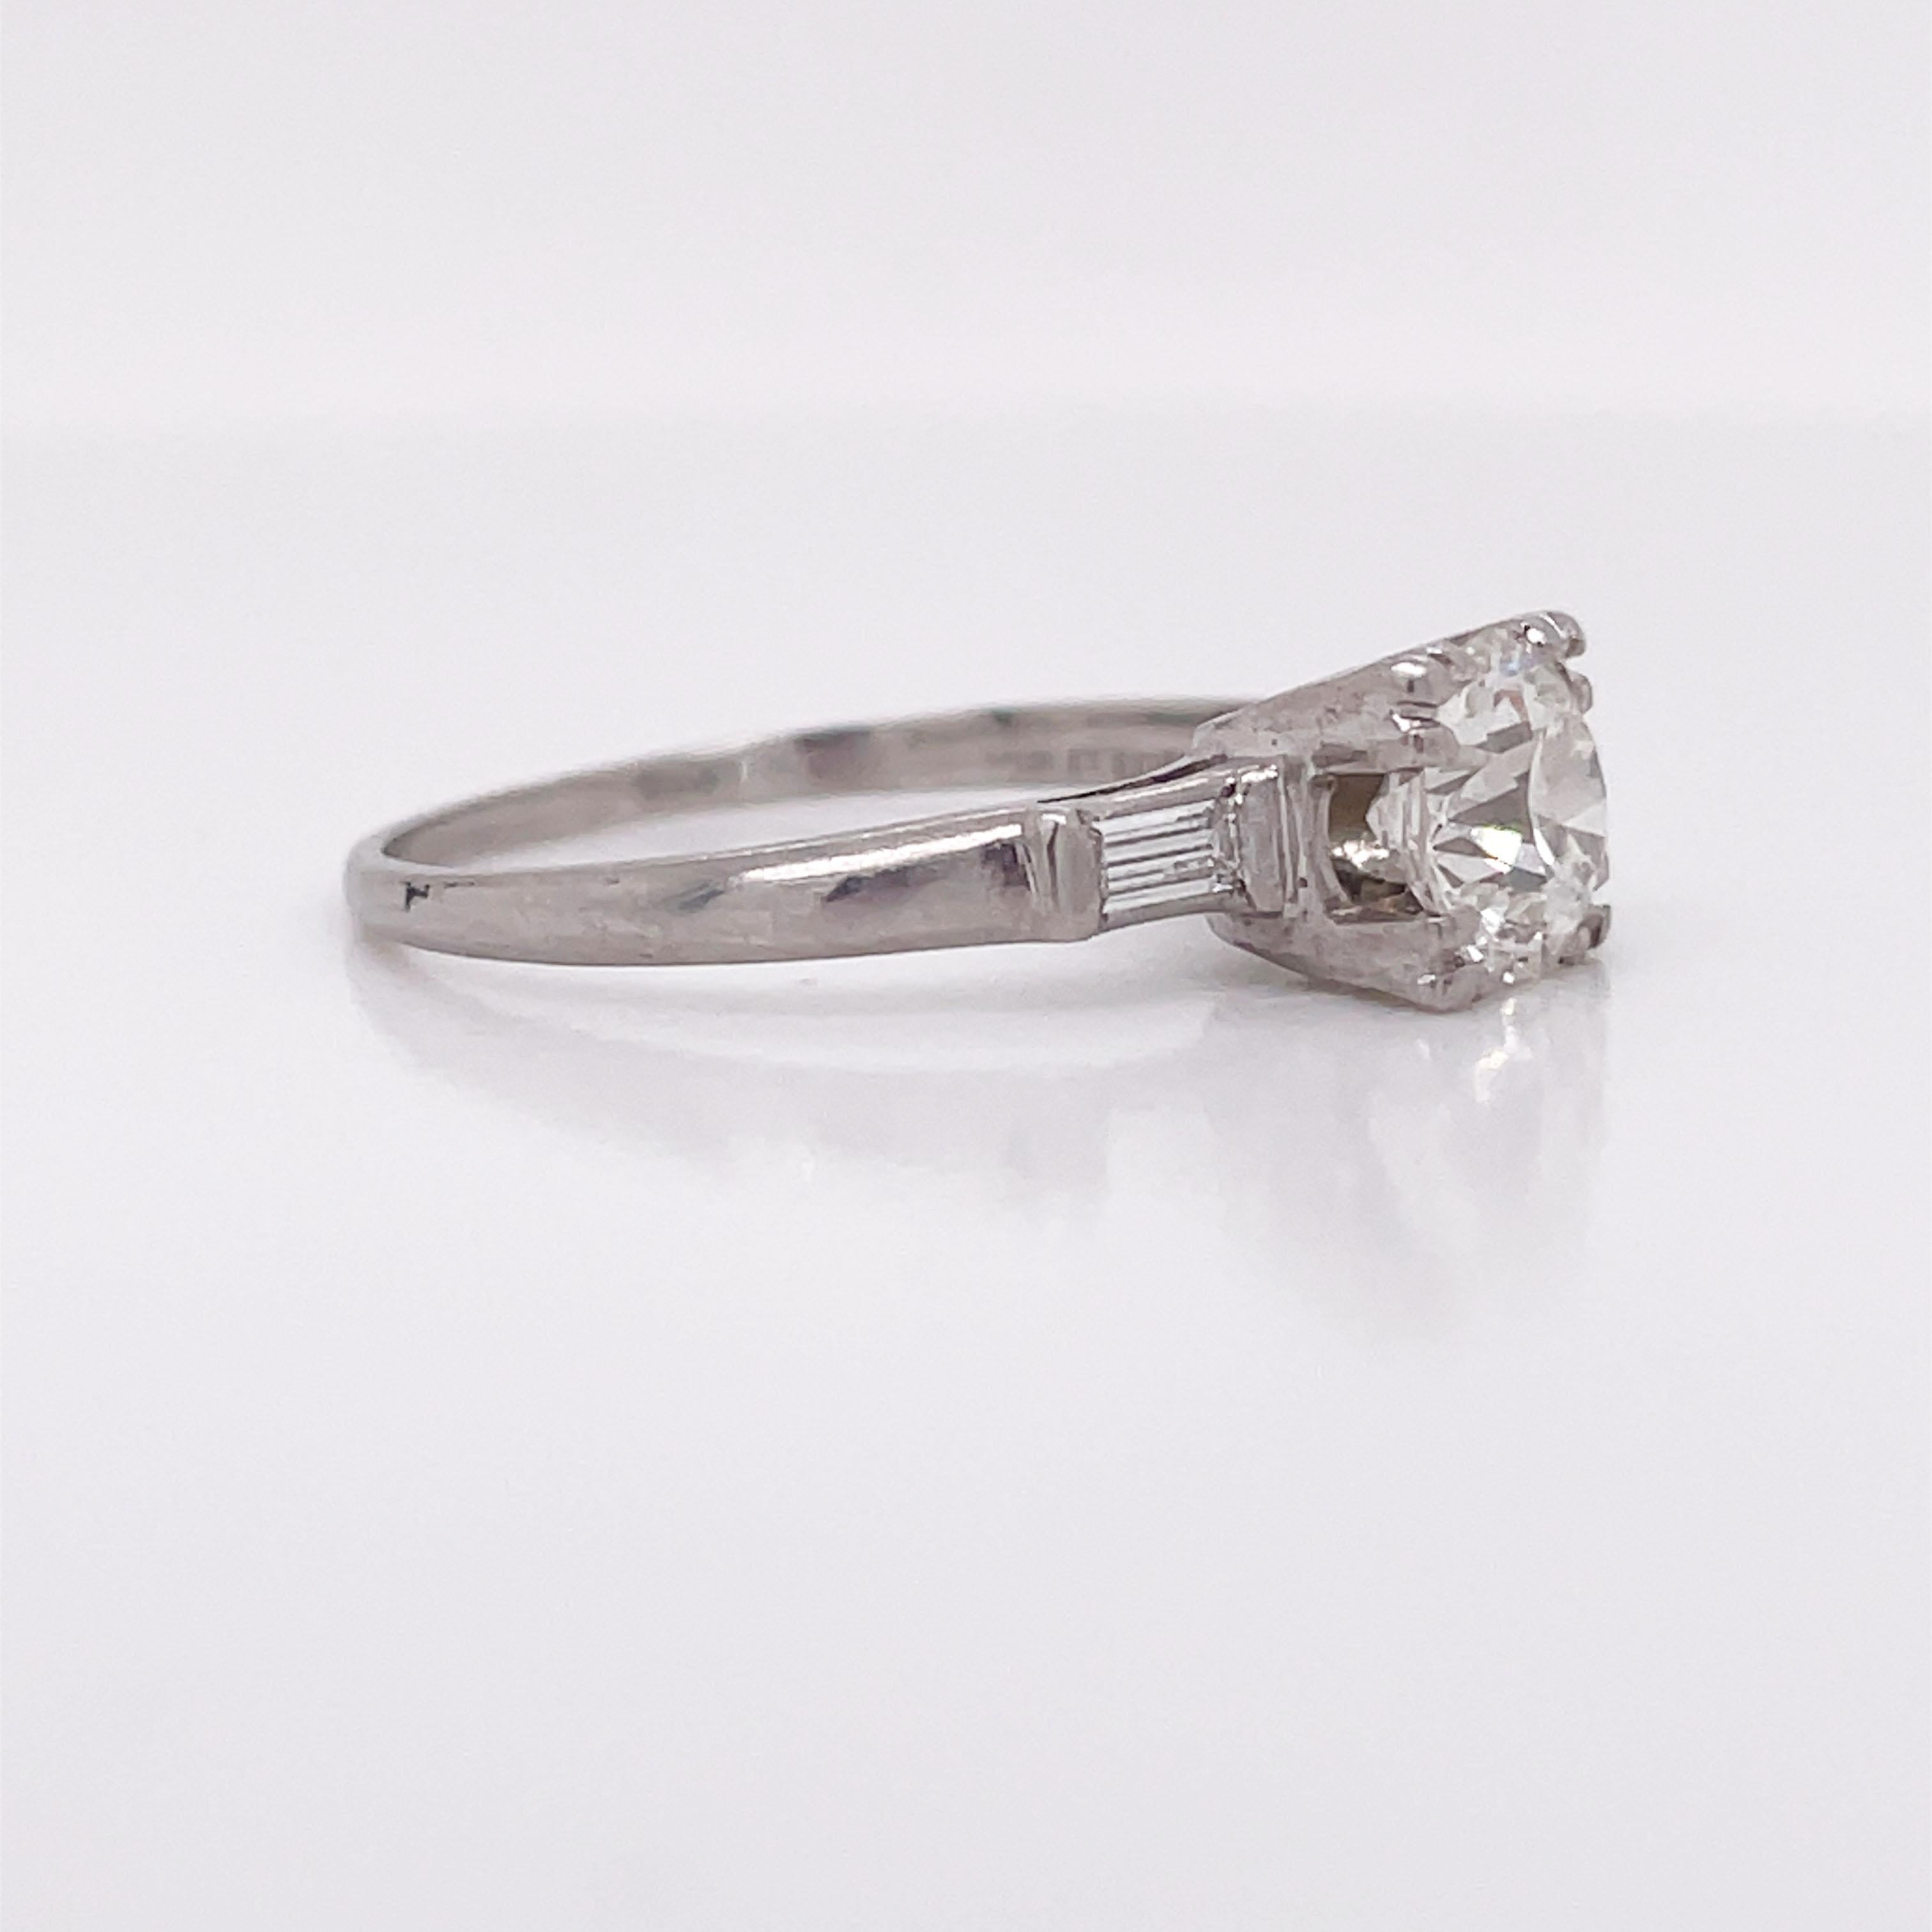 1940s Deco Platinum Diamond Engagement Ring In Excellent Condition For Sale In Lexington, KY